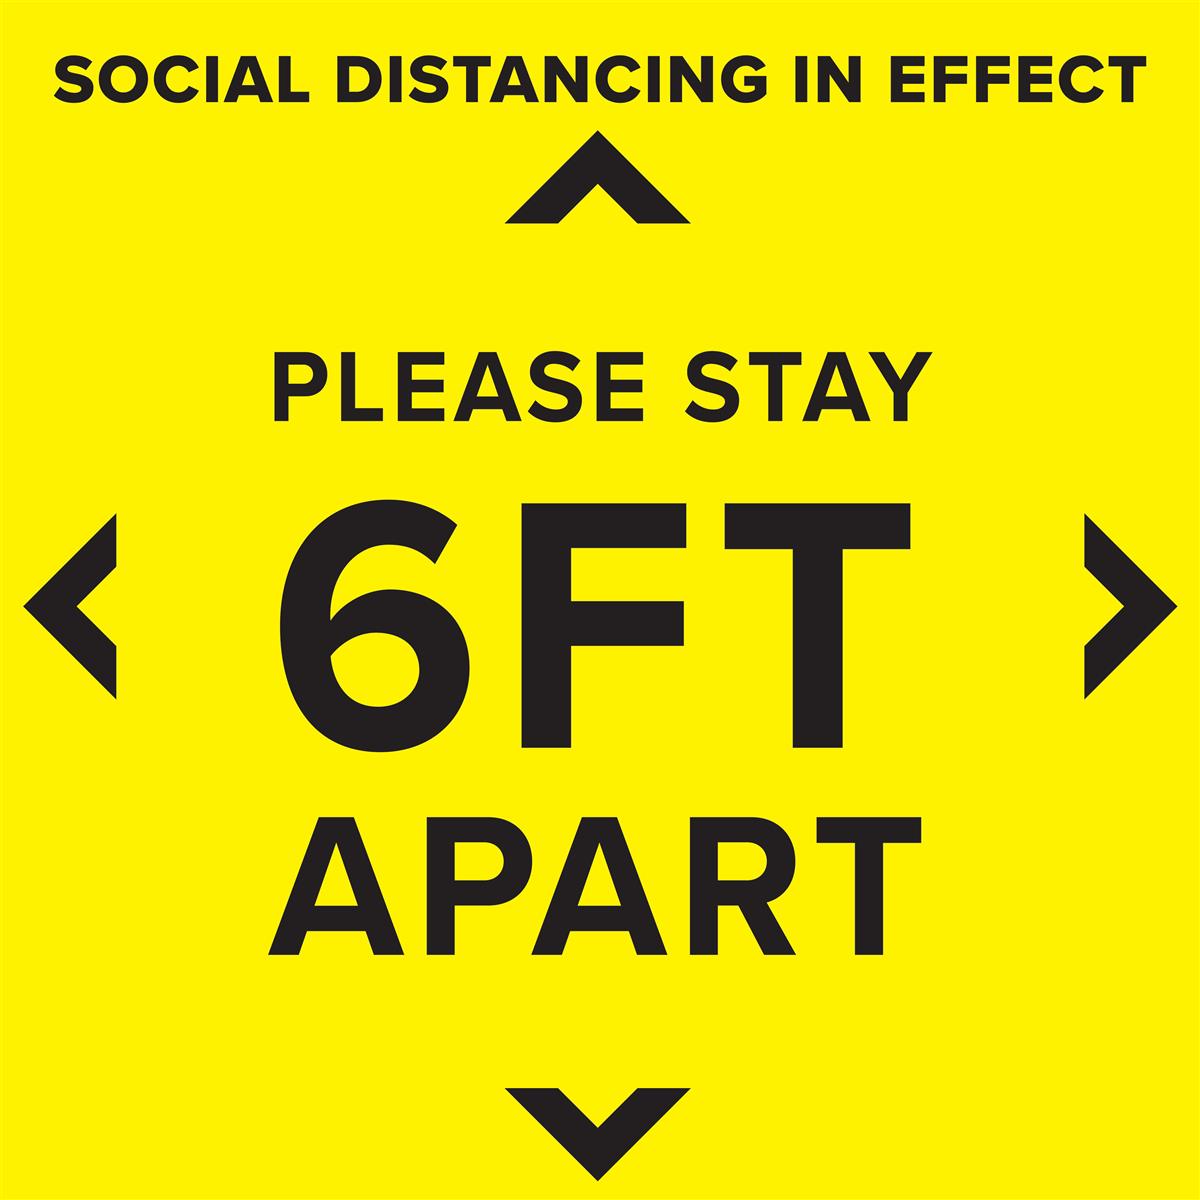 Plastic Maintain 6 Feet Apart Wall Sign Pack of 3 FSD-2690-3 Supply360Thank You for Practicing Social Distancing 7 x 7 x .06 Social Distancing Awareness Sign 